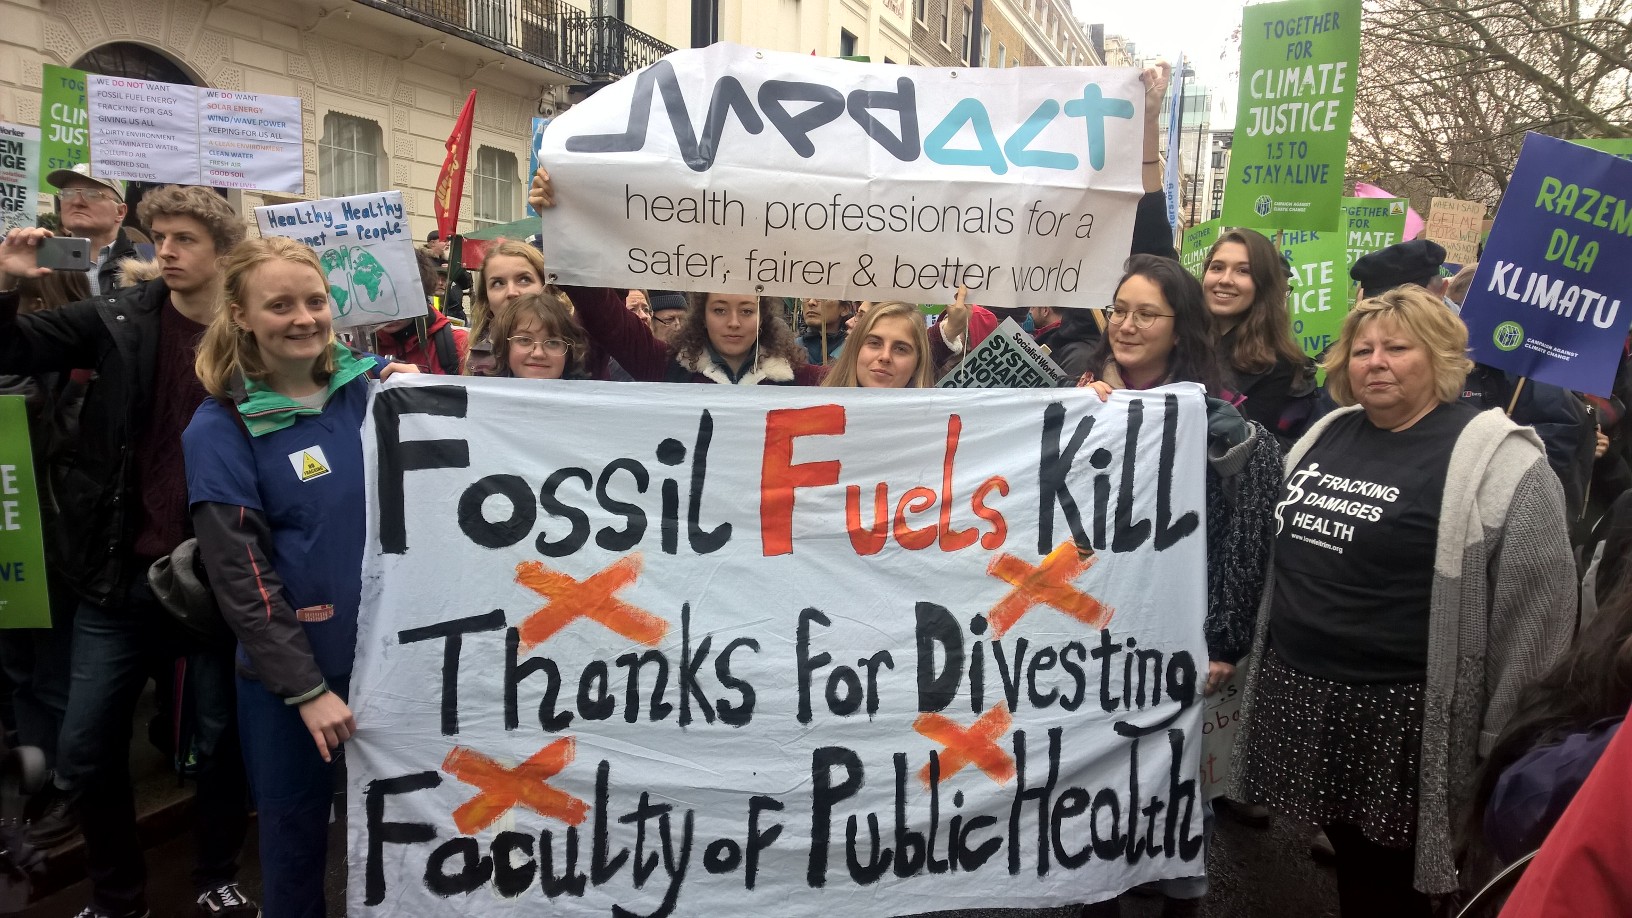 Leading UK Public Health body ends investment in fossil fuel industry